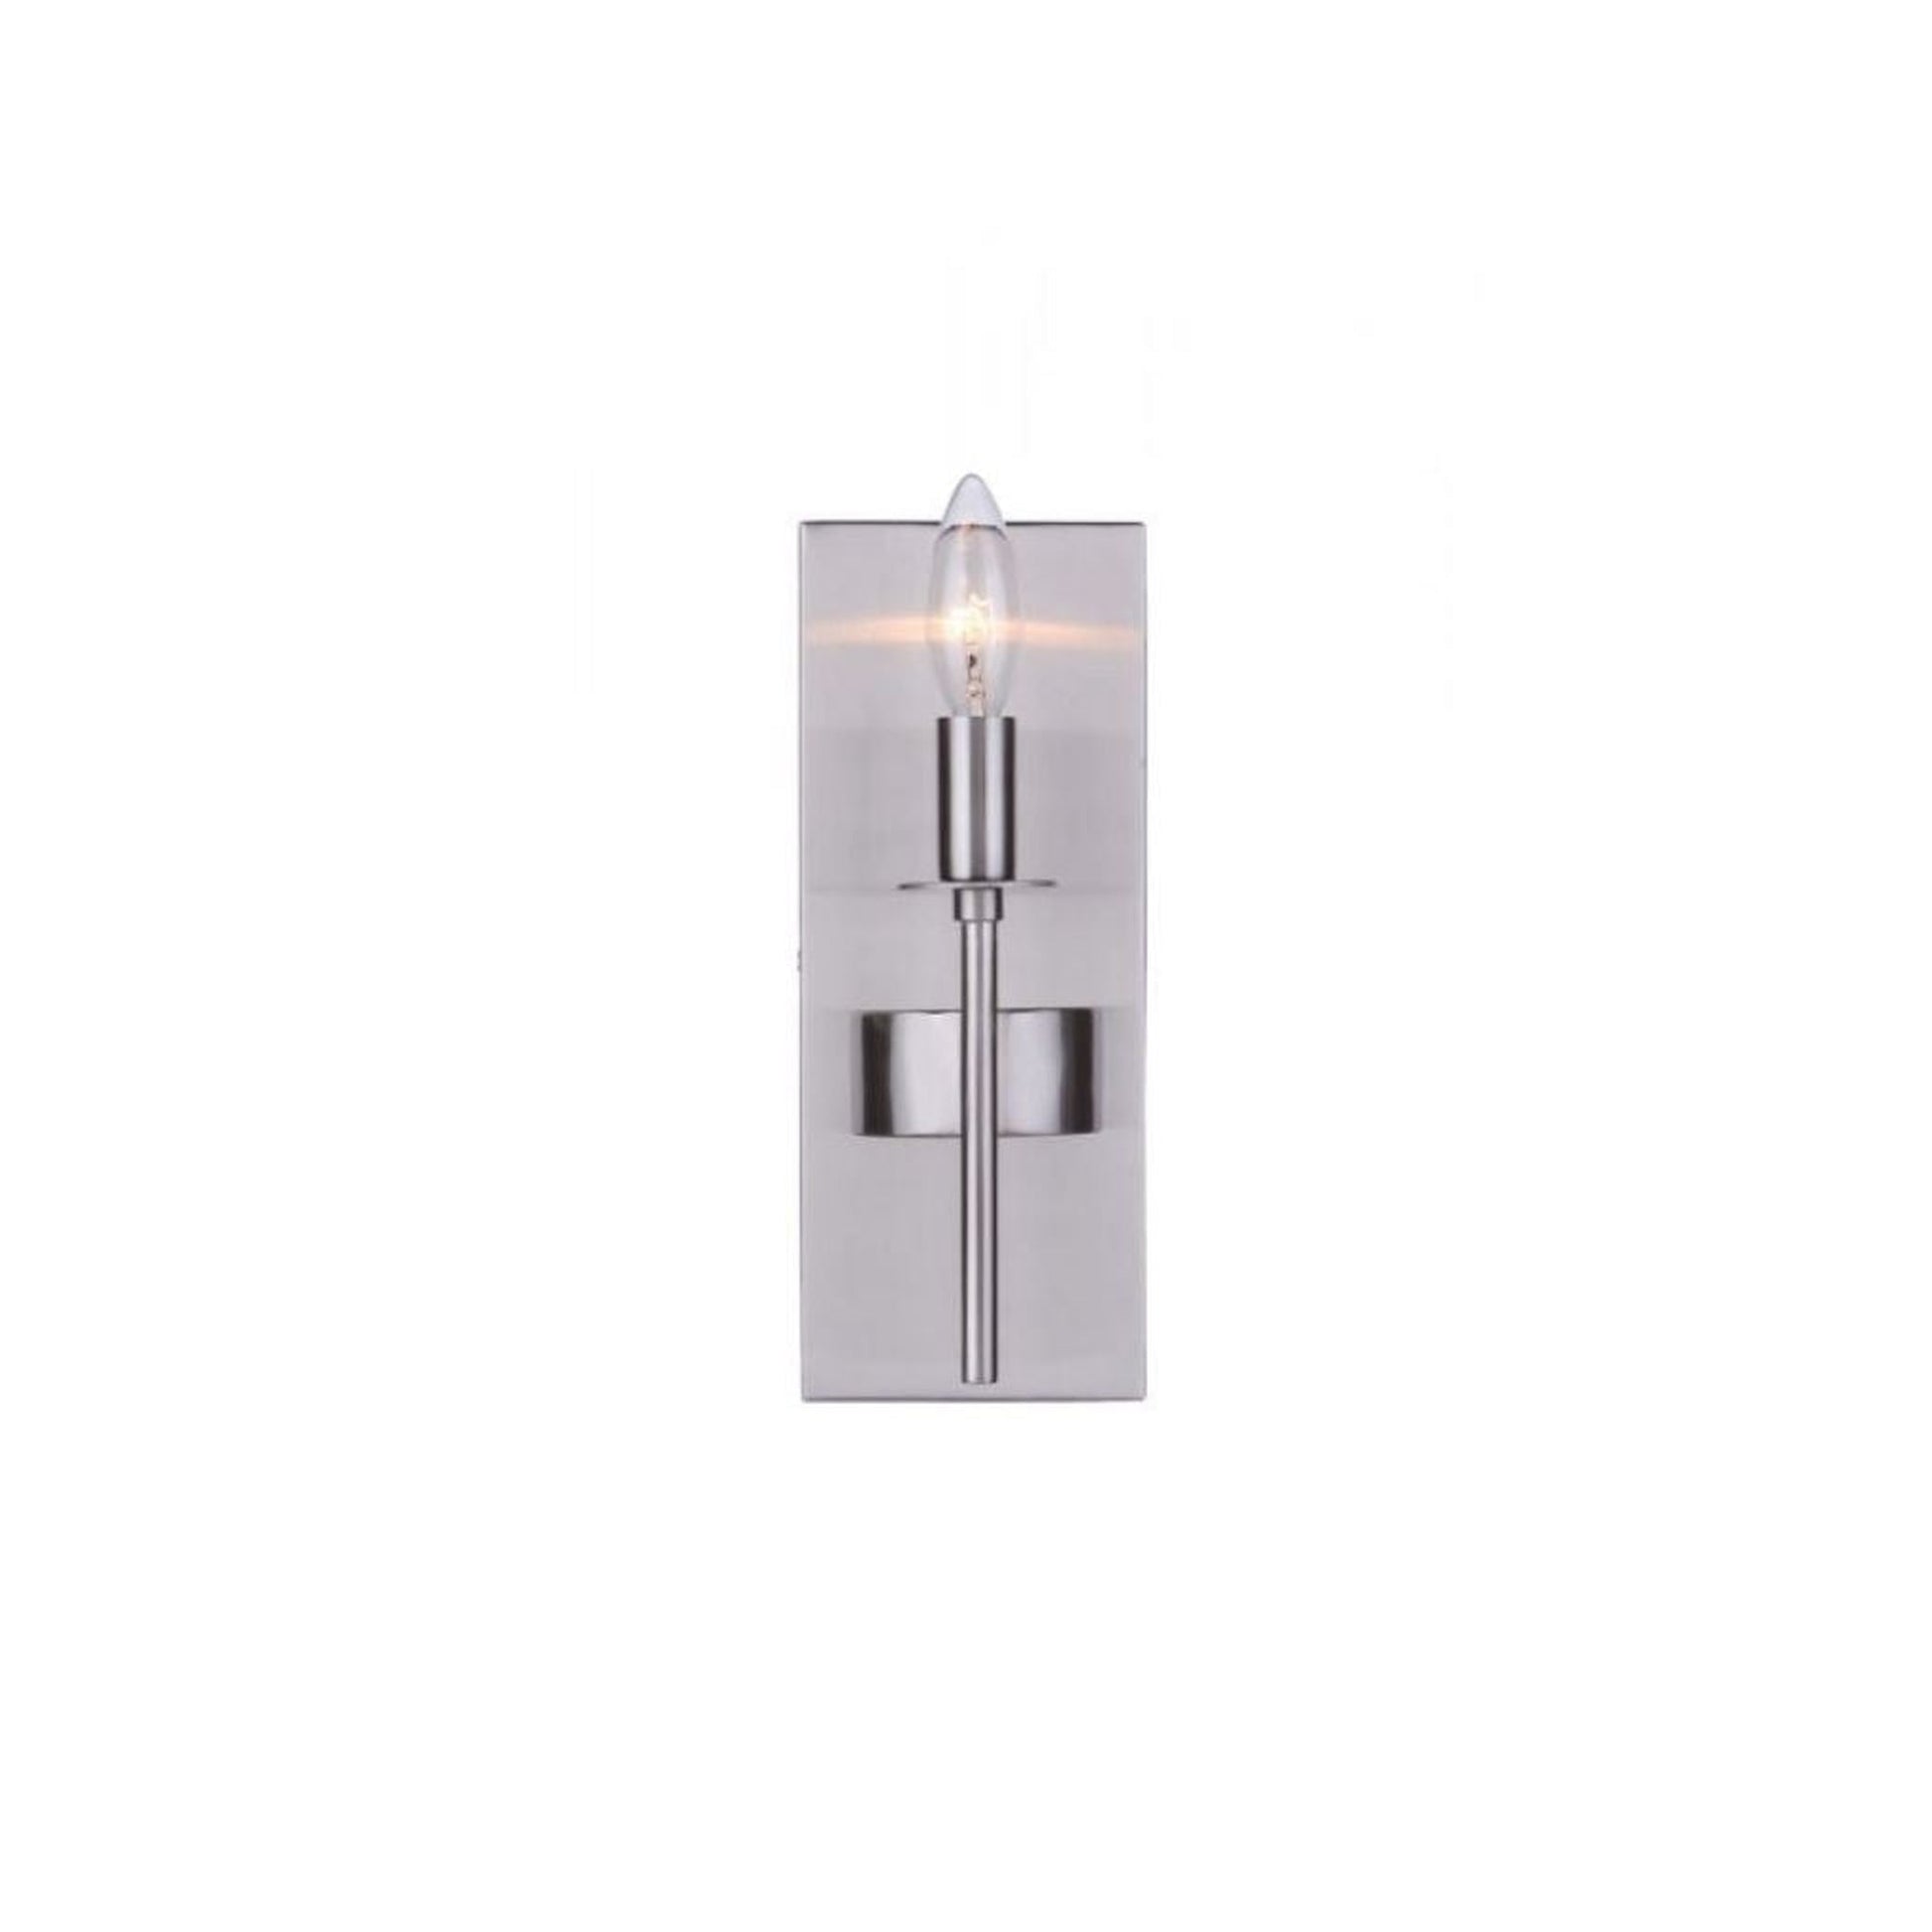 Craftmade Larrson 5" x 11" 1-Light Brushed Polished Nickel Candle-Style Wall Sconce